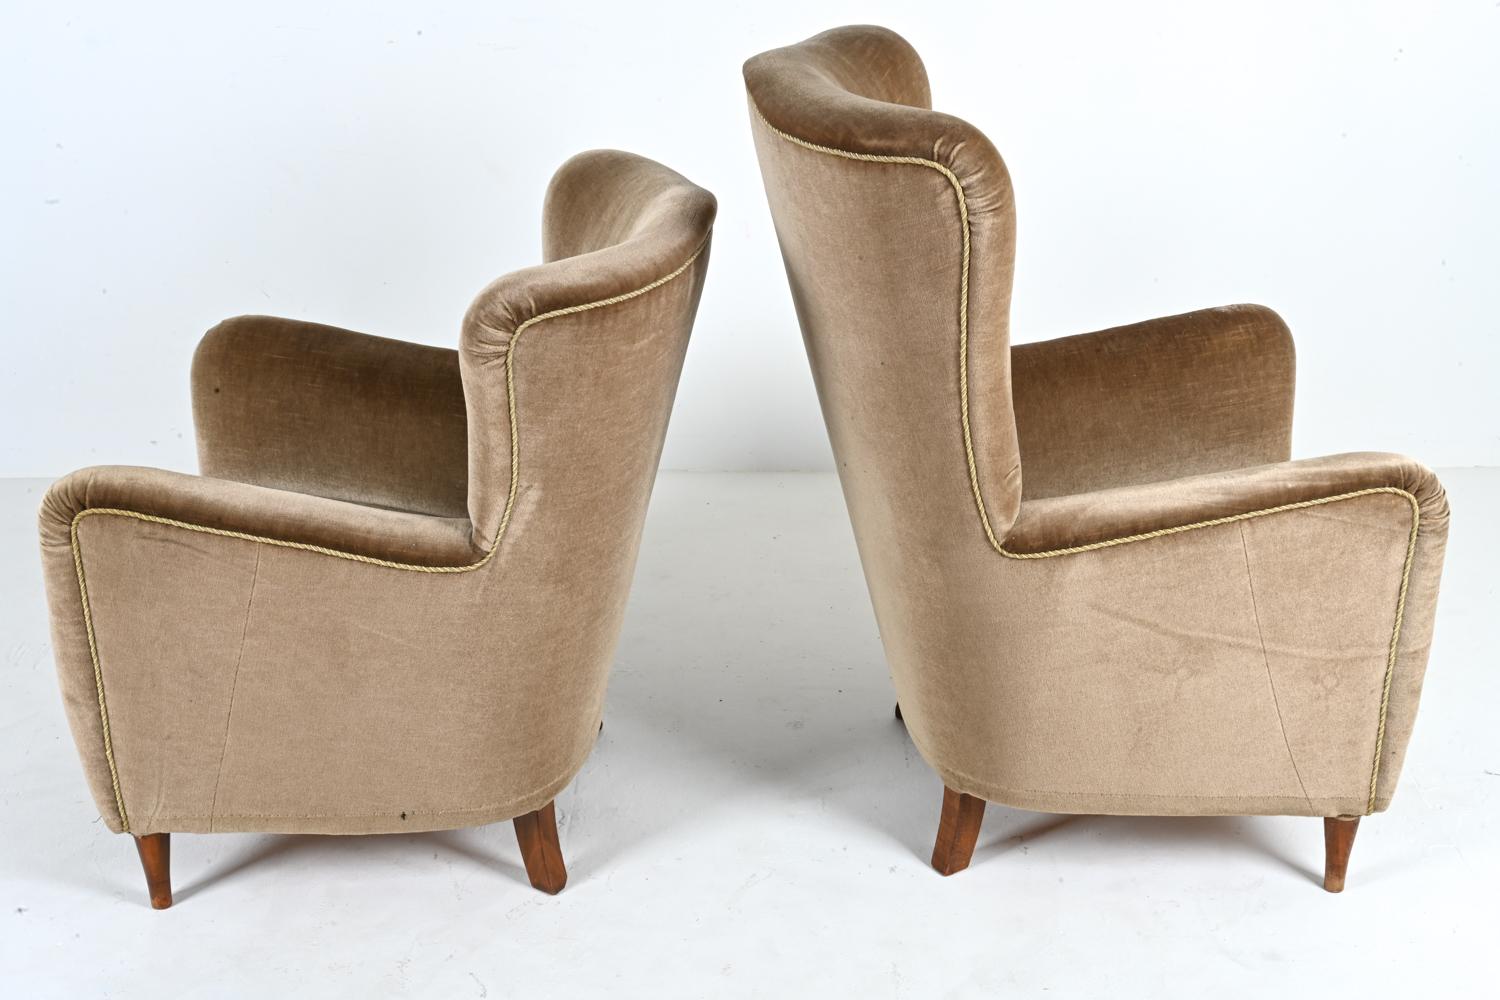 Two Danish Easy Chairs, Manner of Frits Henningsen, c. 1950's For Sale 3